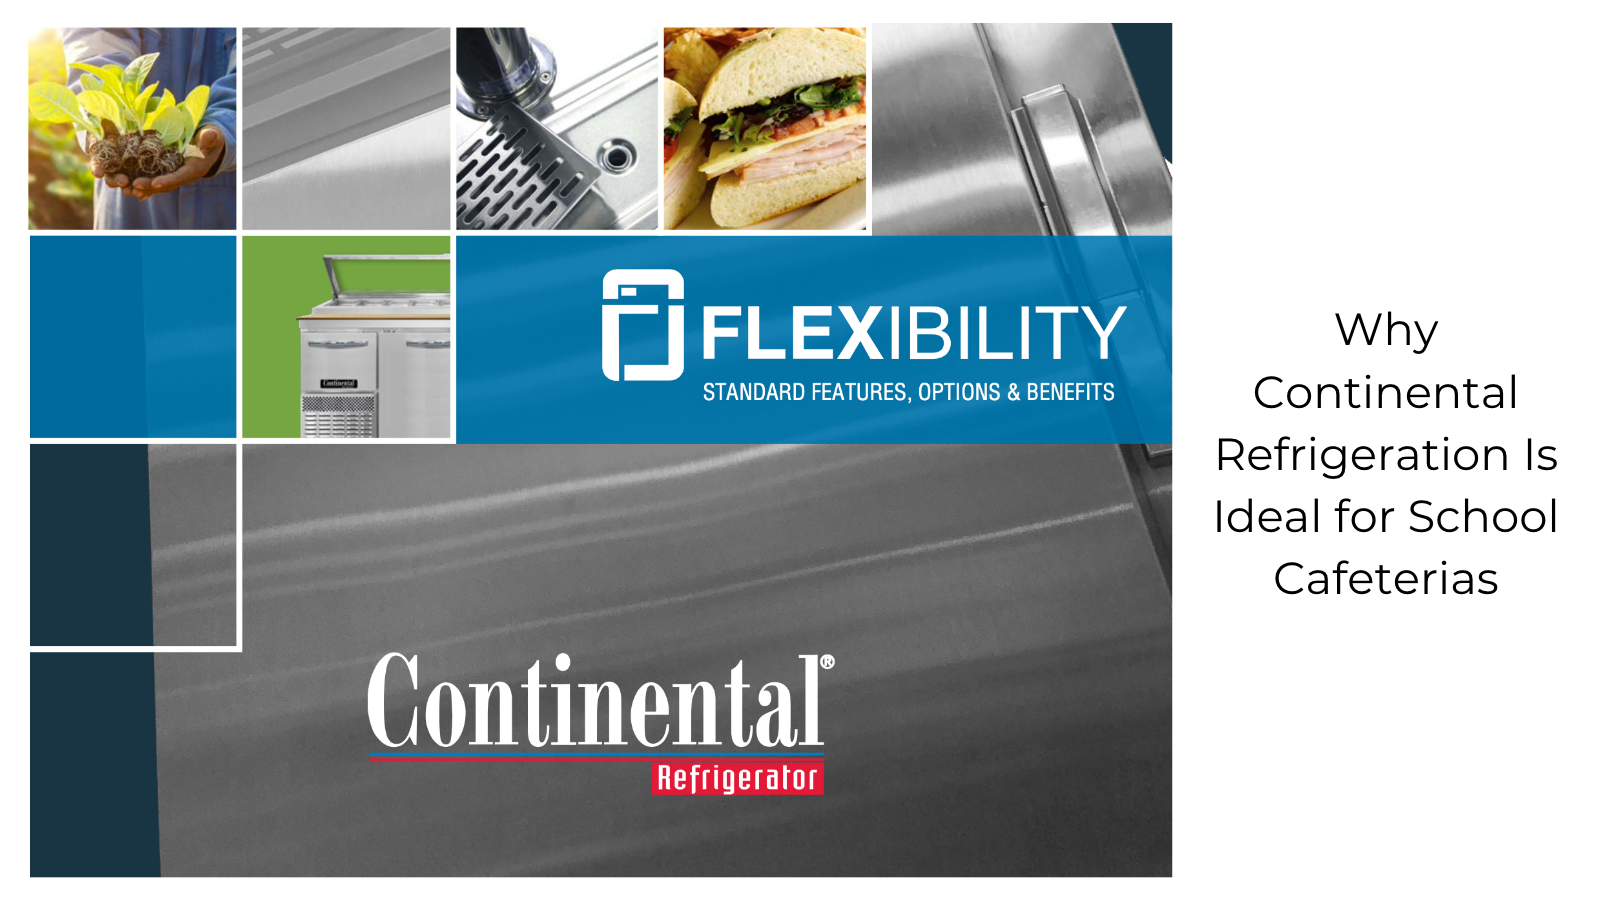 Why Continental Refrigeration Is Ideal for School Cafeterias